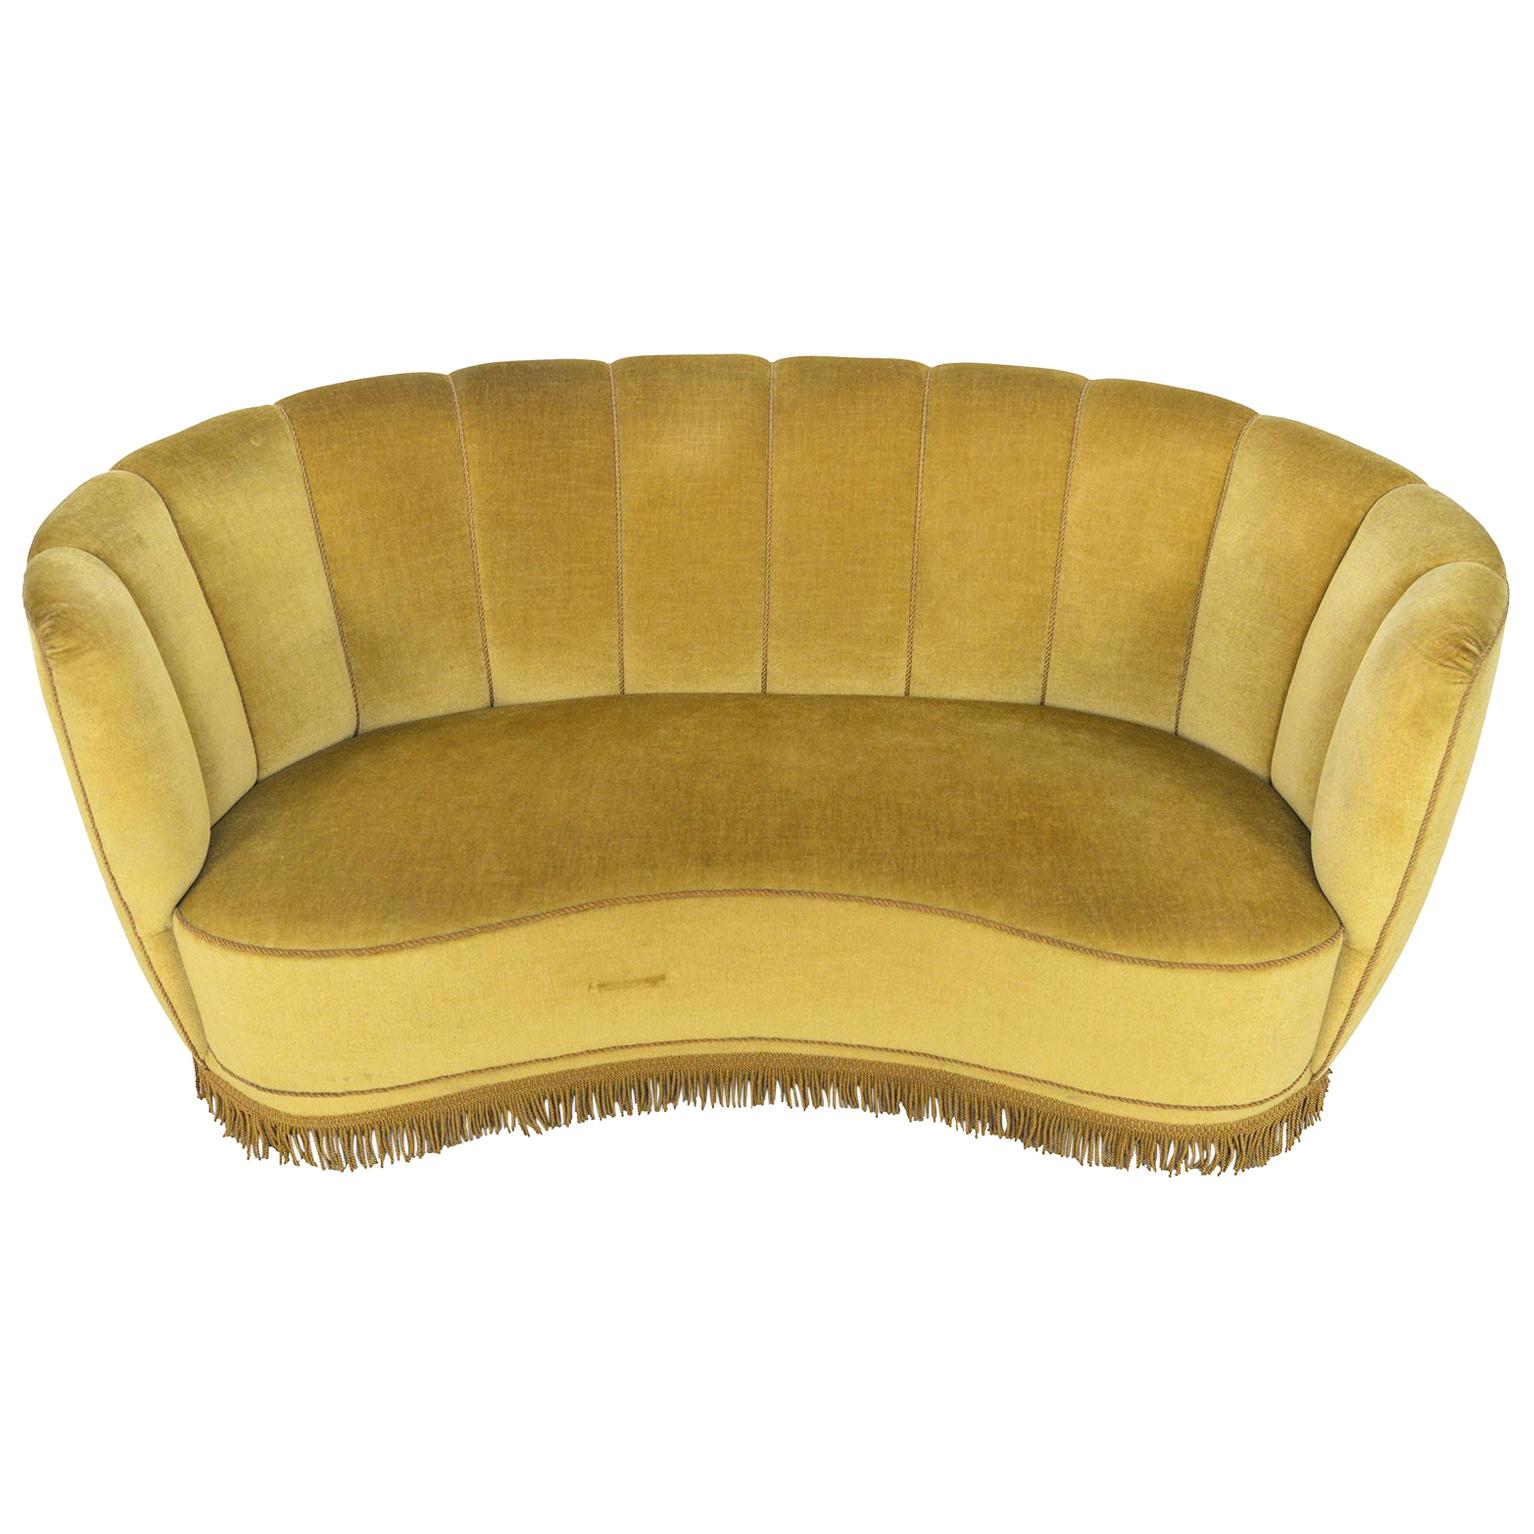 This beautifully preserved Danish modern velvet banana sofa was crafted in the 1950s. Covered in chartreuse velvet, this scalloped design is adorned with coordinated welting and fringe. In excellent original condition.

  